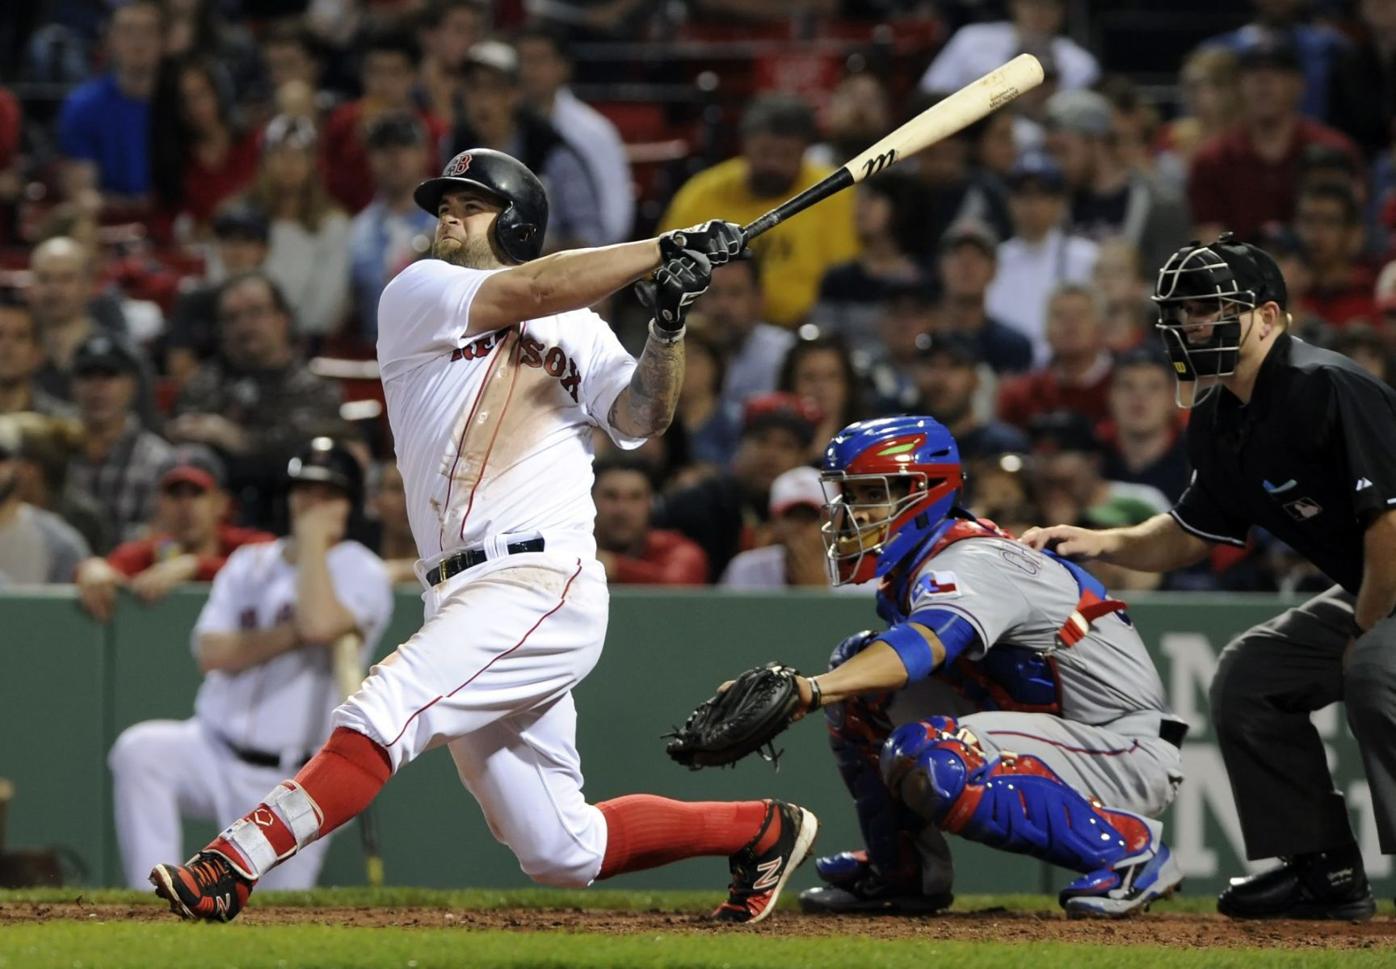 Napoli's two homers lift Red Sox over Angels